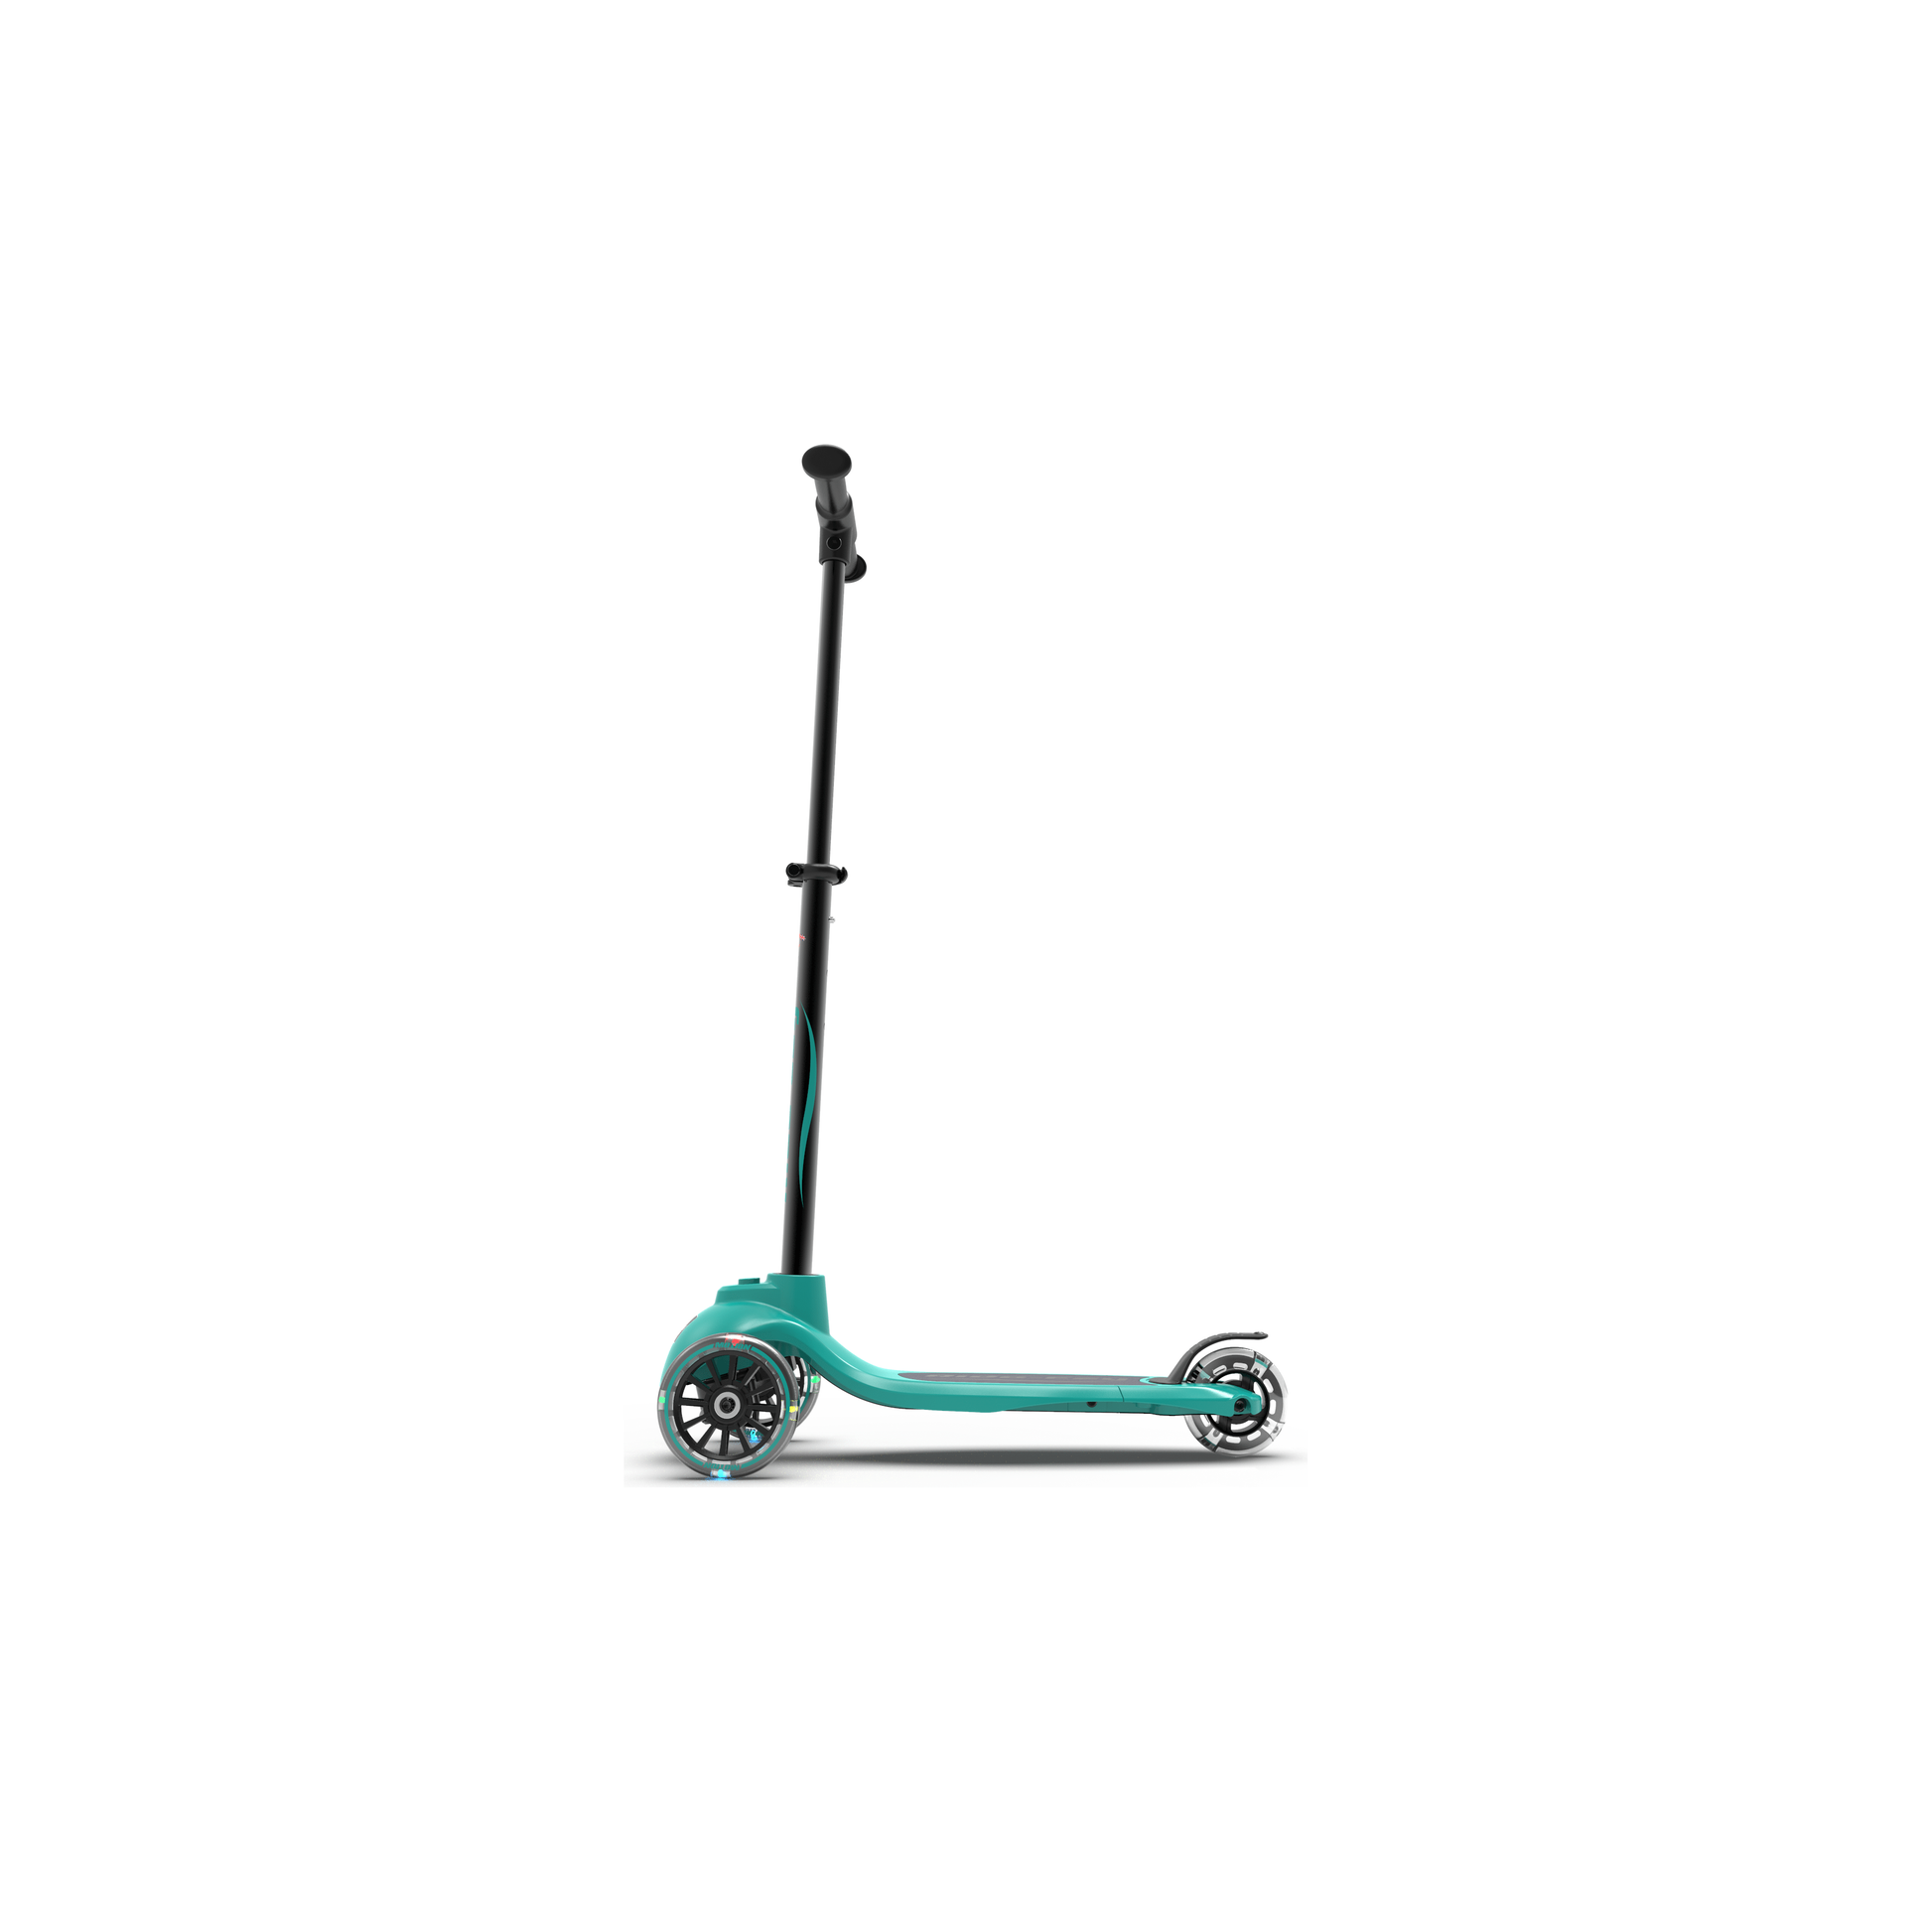 Ride-Ezy Kick & Go Scooter - Woodland Green stage 4 left side